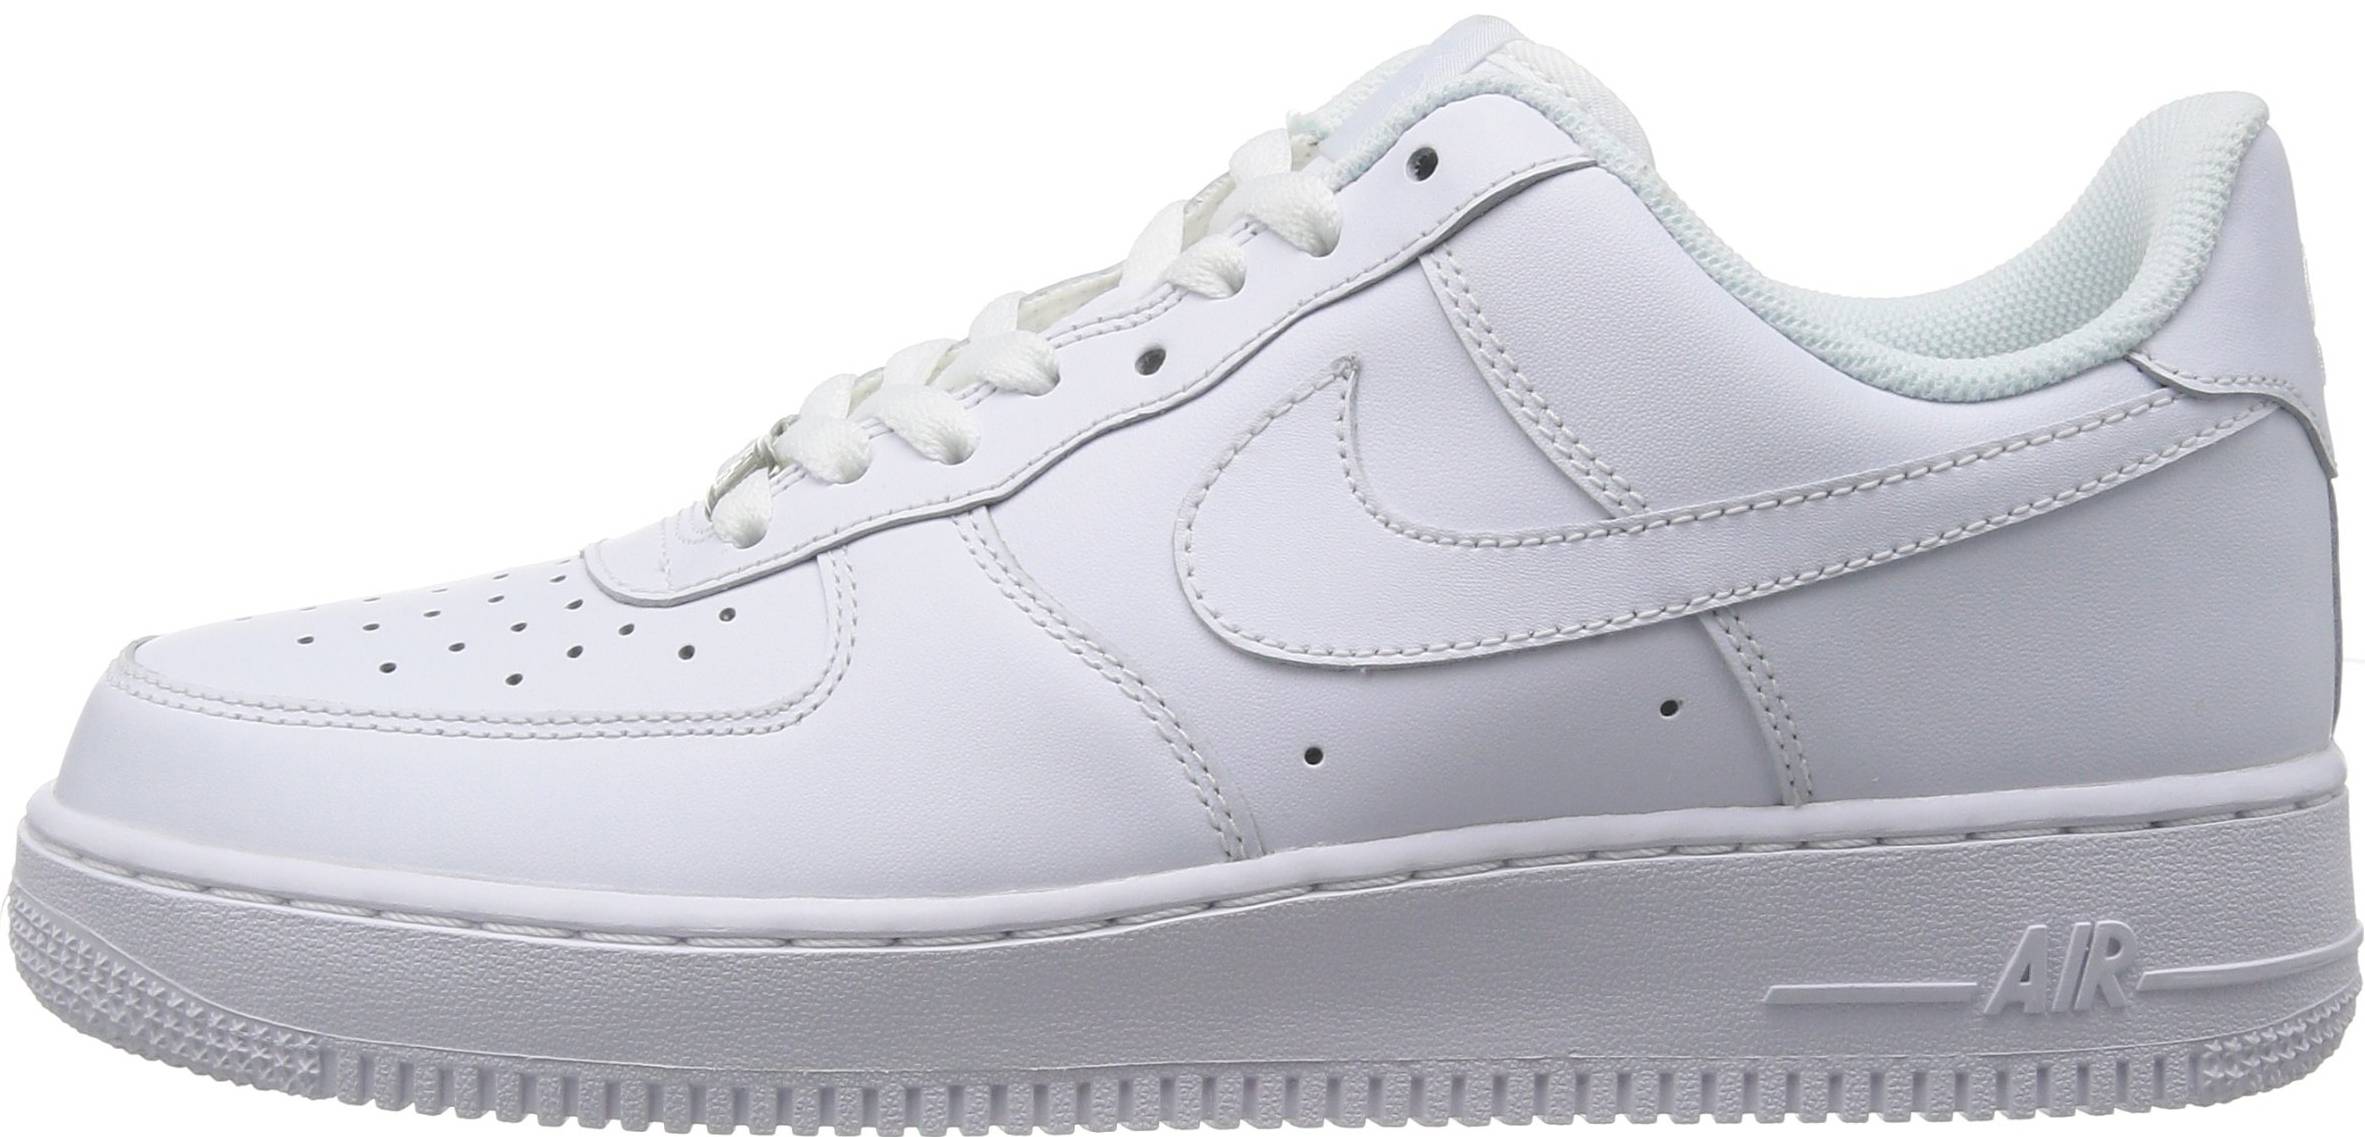 Save 13% on Nike Air Force 1 Sneakers 